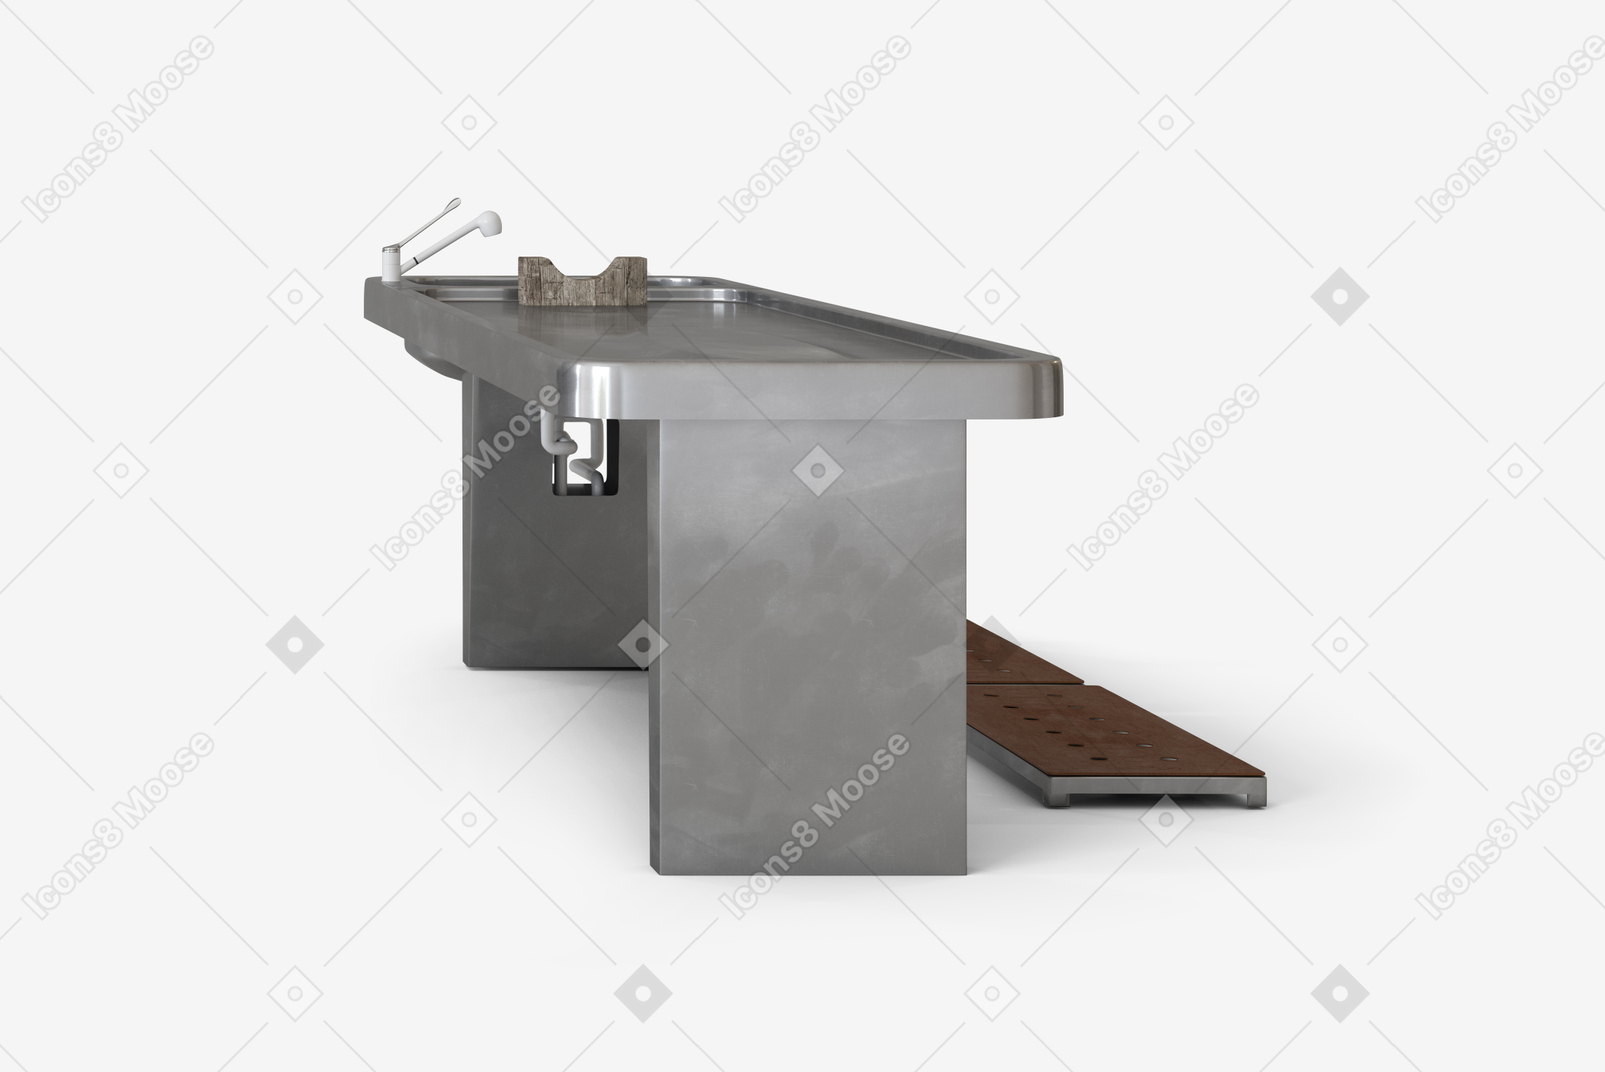 An autopsy table on the white background